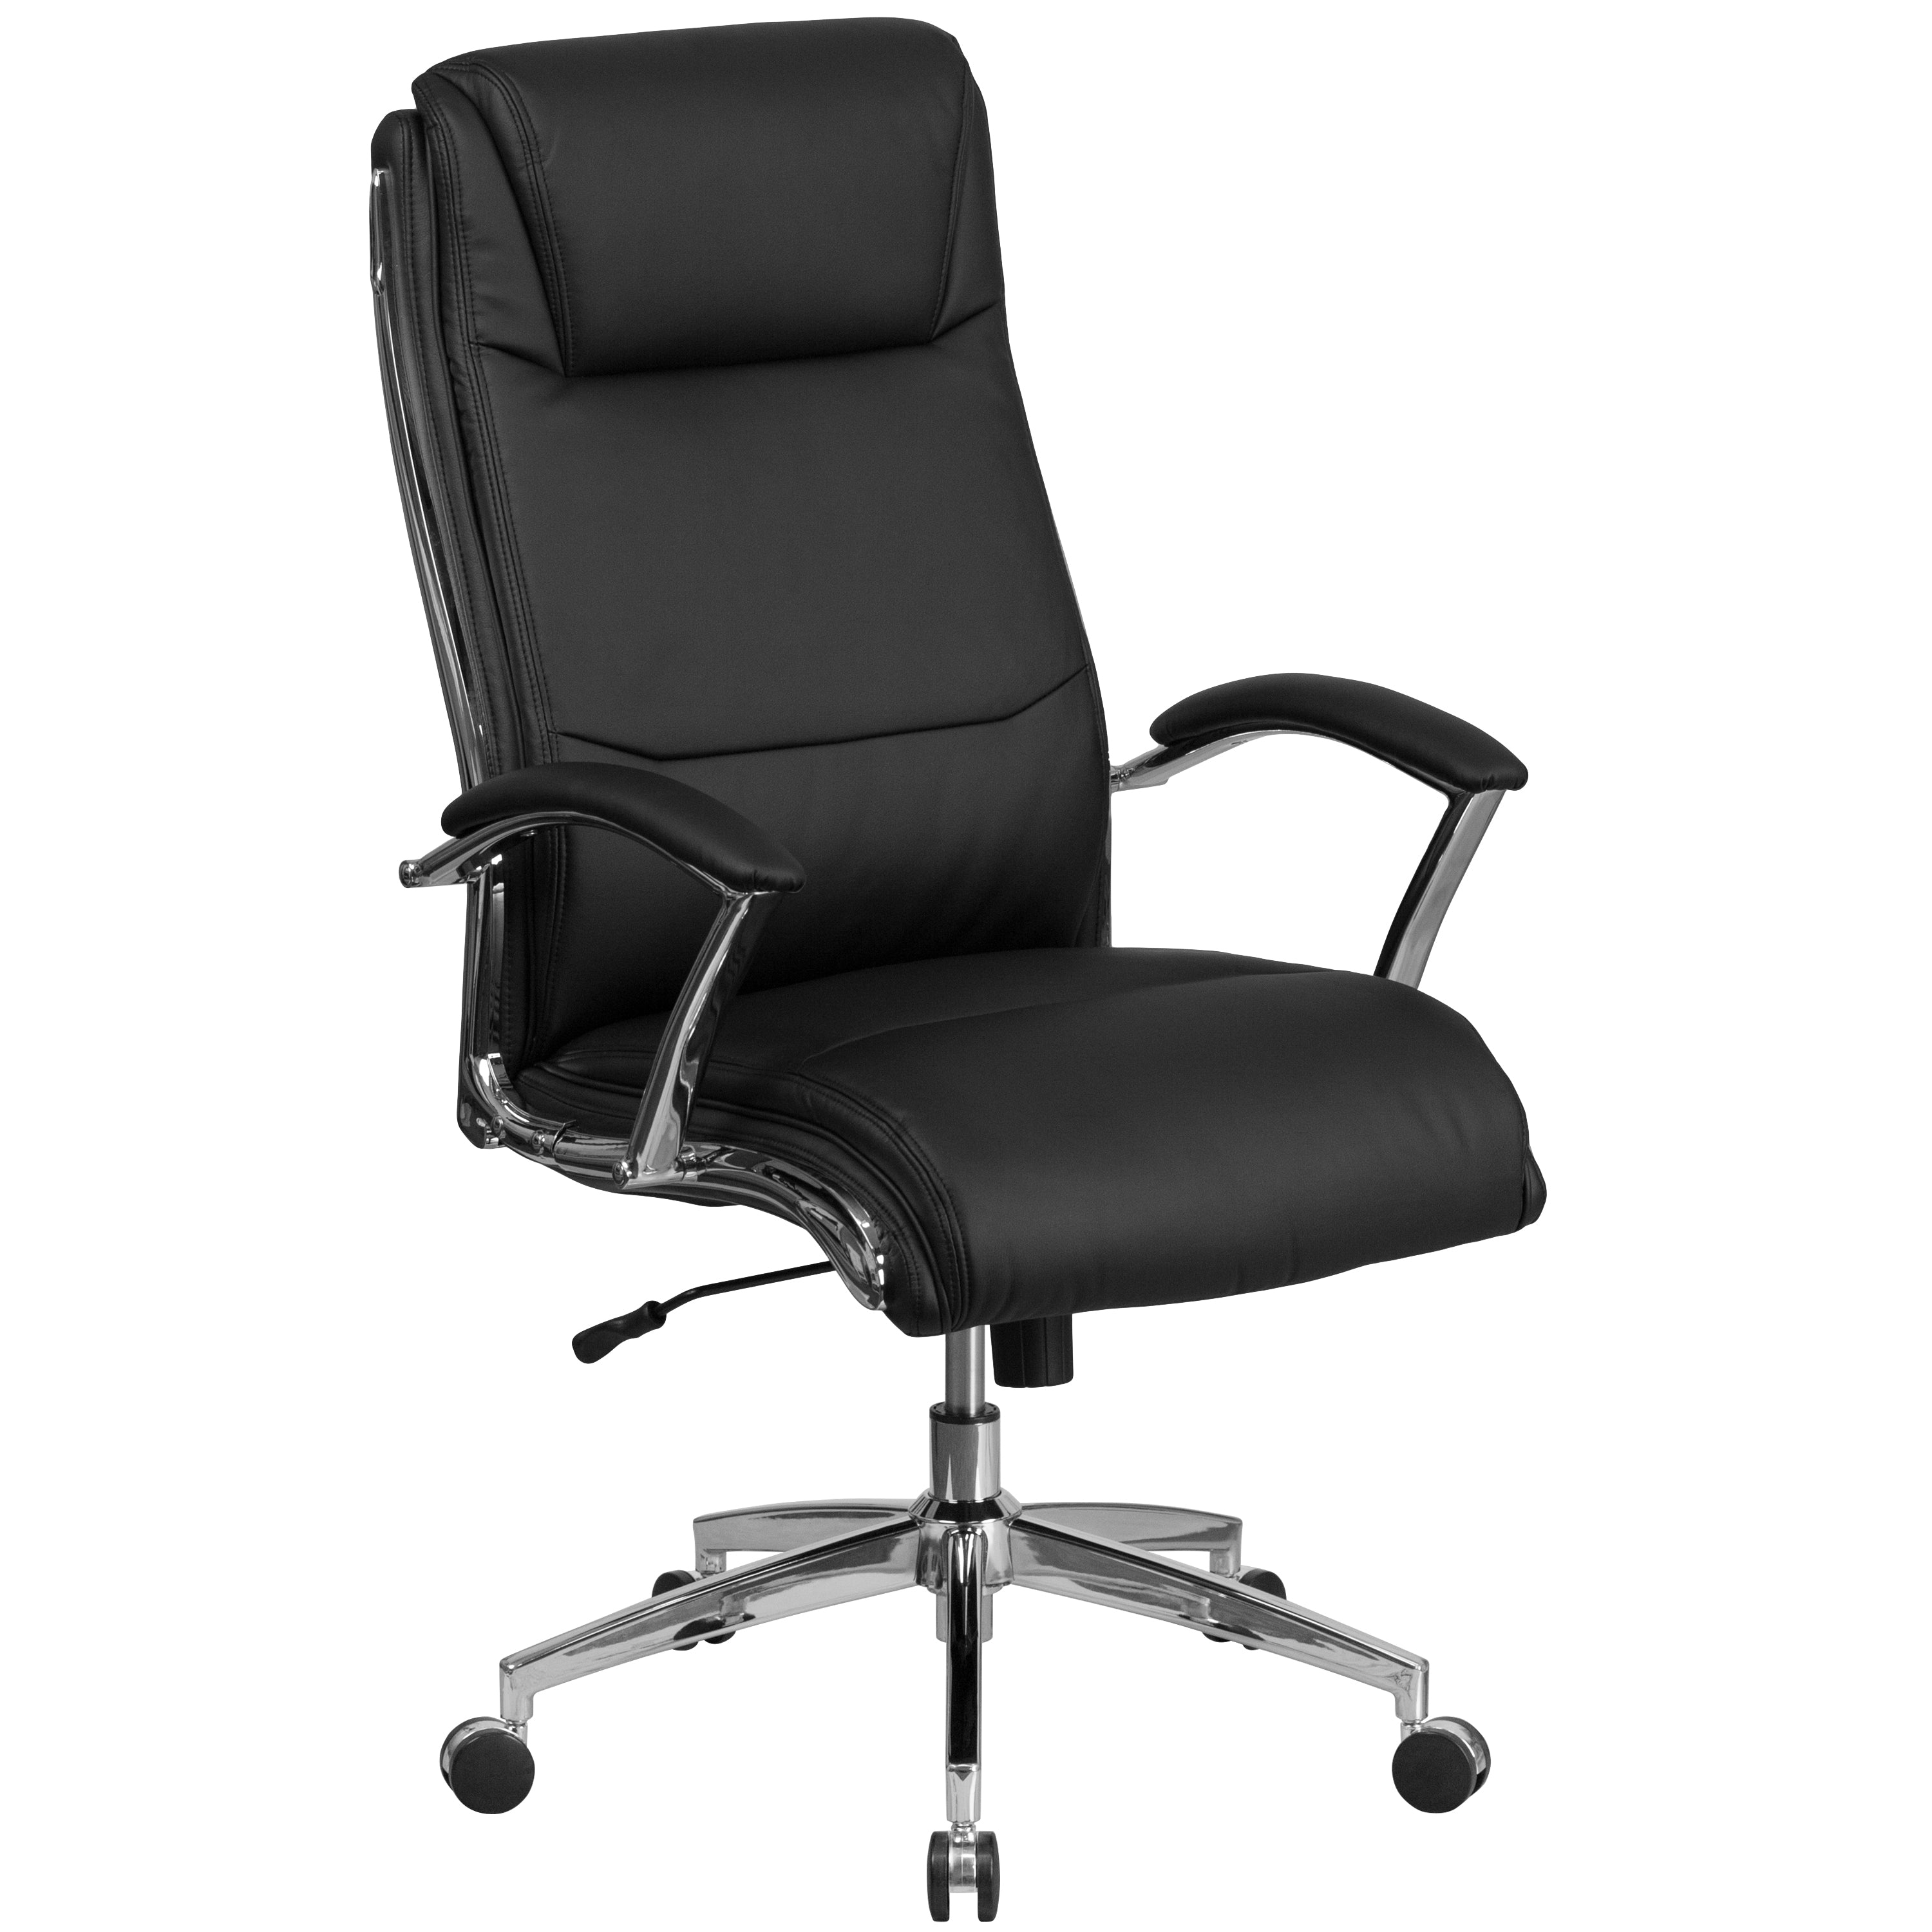 High Back Designer Smooth Upholstered Executive Swivel Office Chair with Chrome Base and Arms-Office Chair-Flash Furniture-Wall2Wall Furnishings